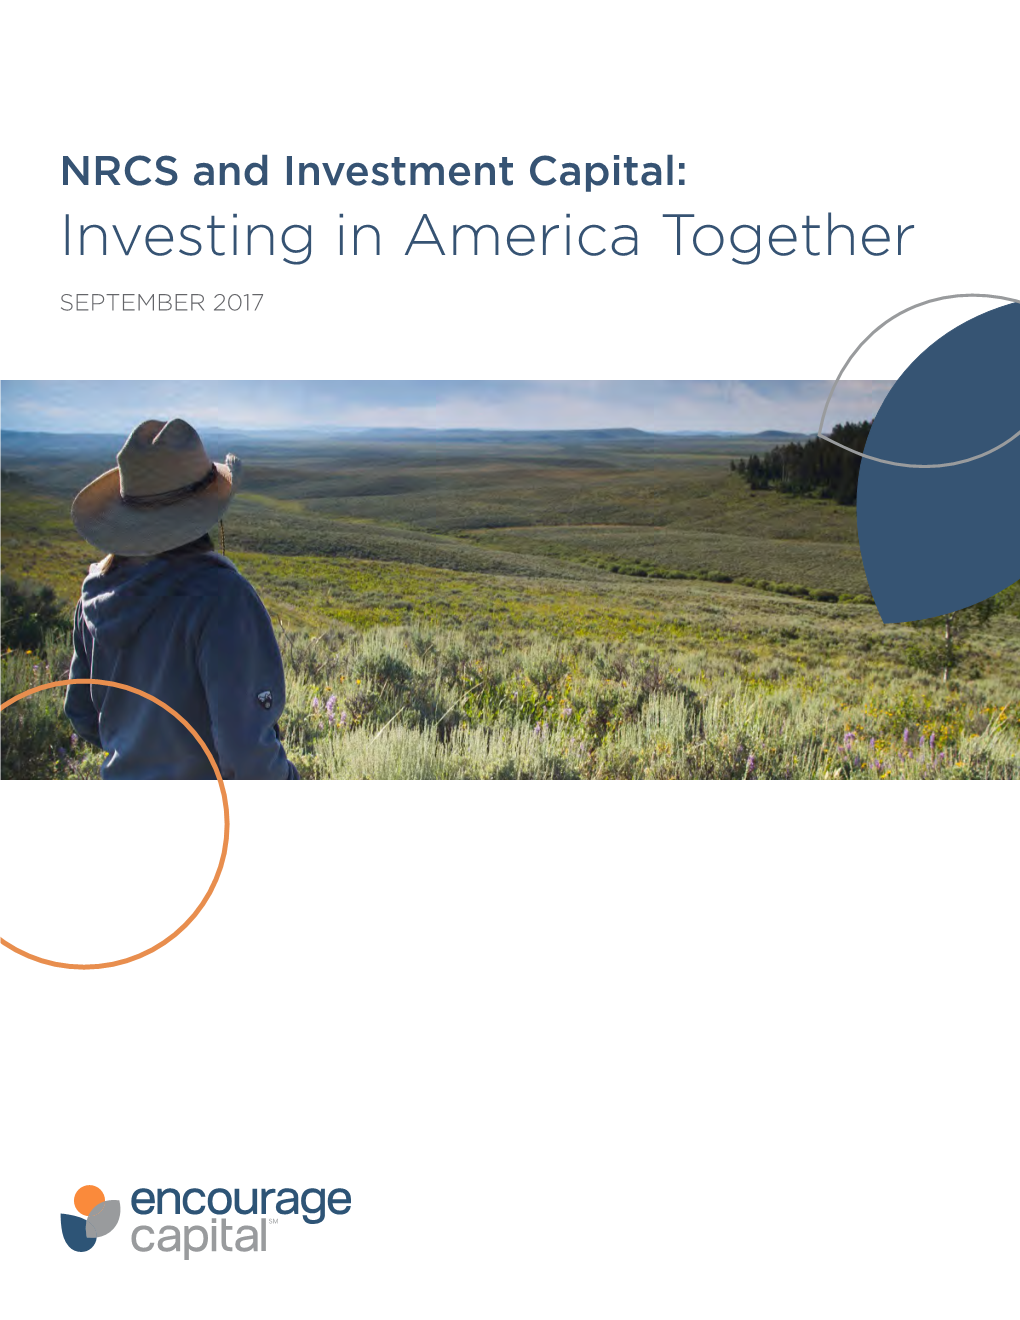 NRCS and Investment Capital: Investing in America Together